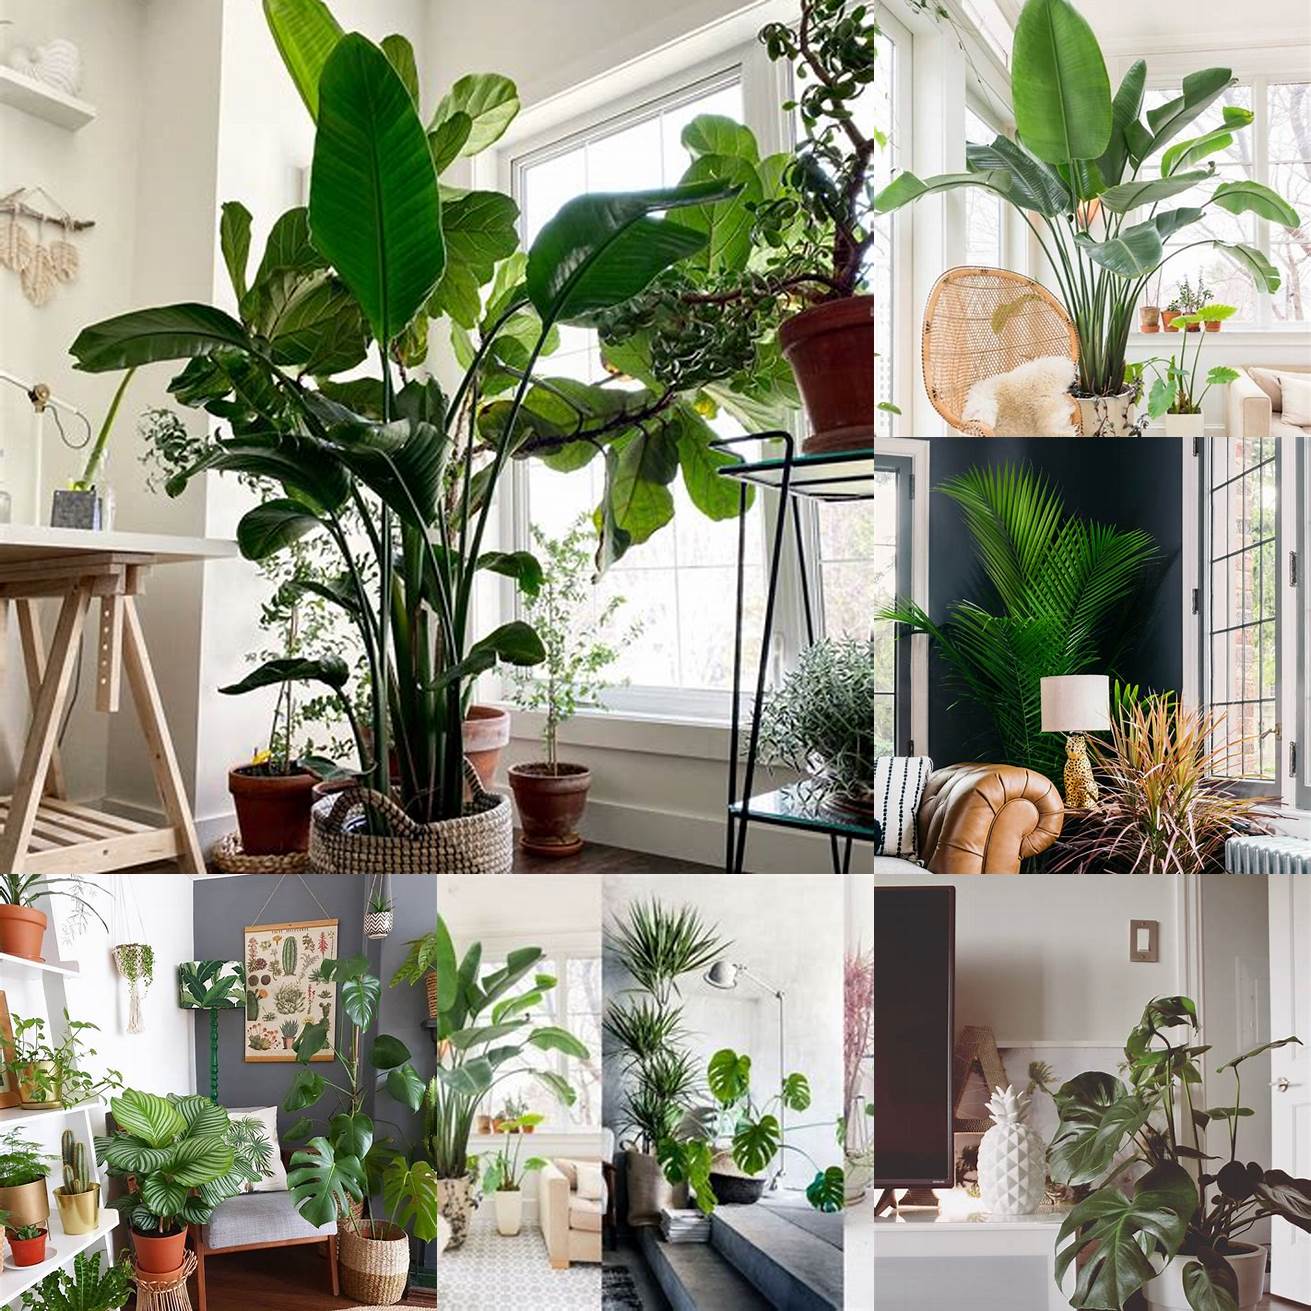 Choose the right plants for your space